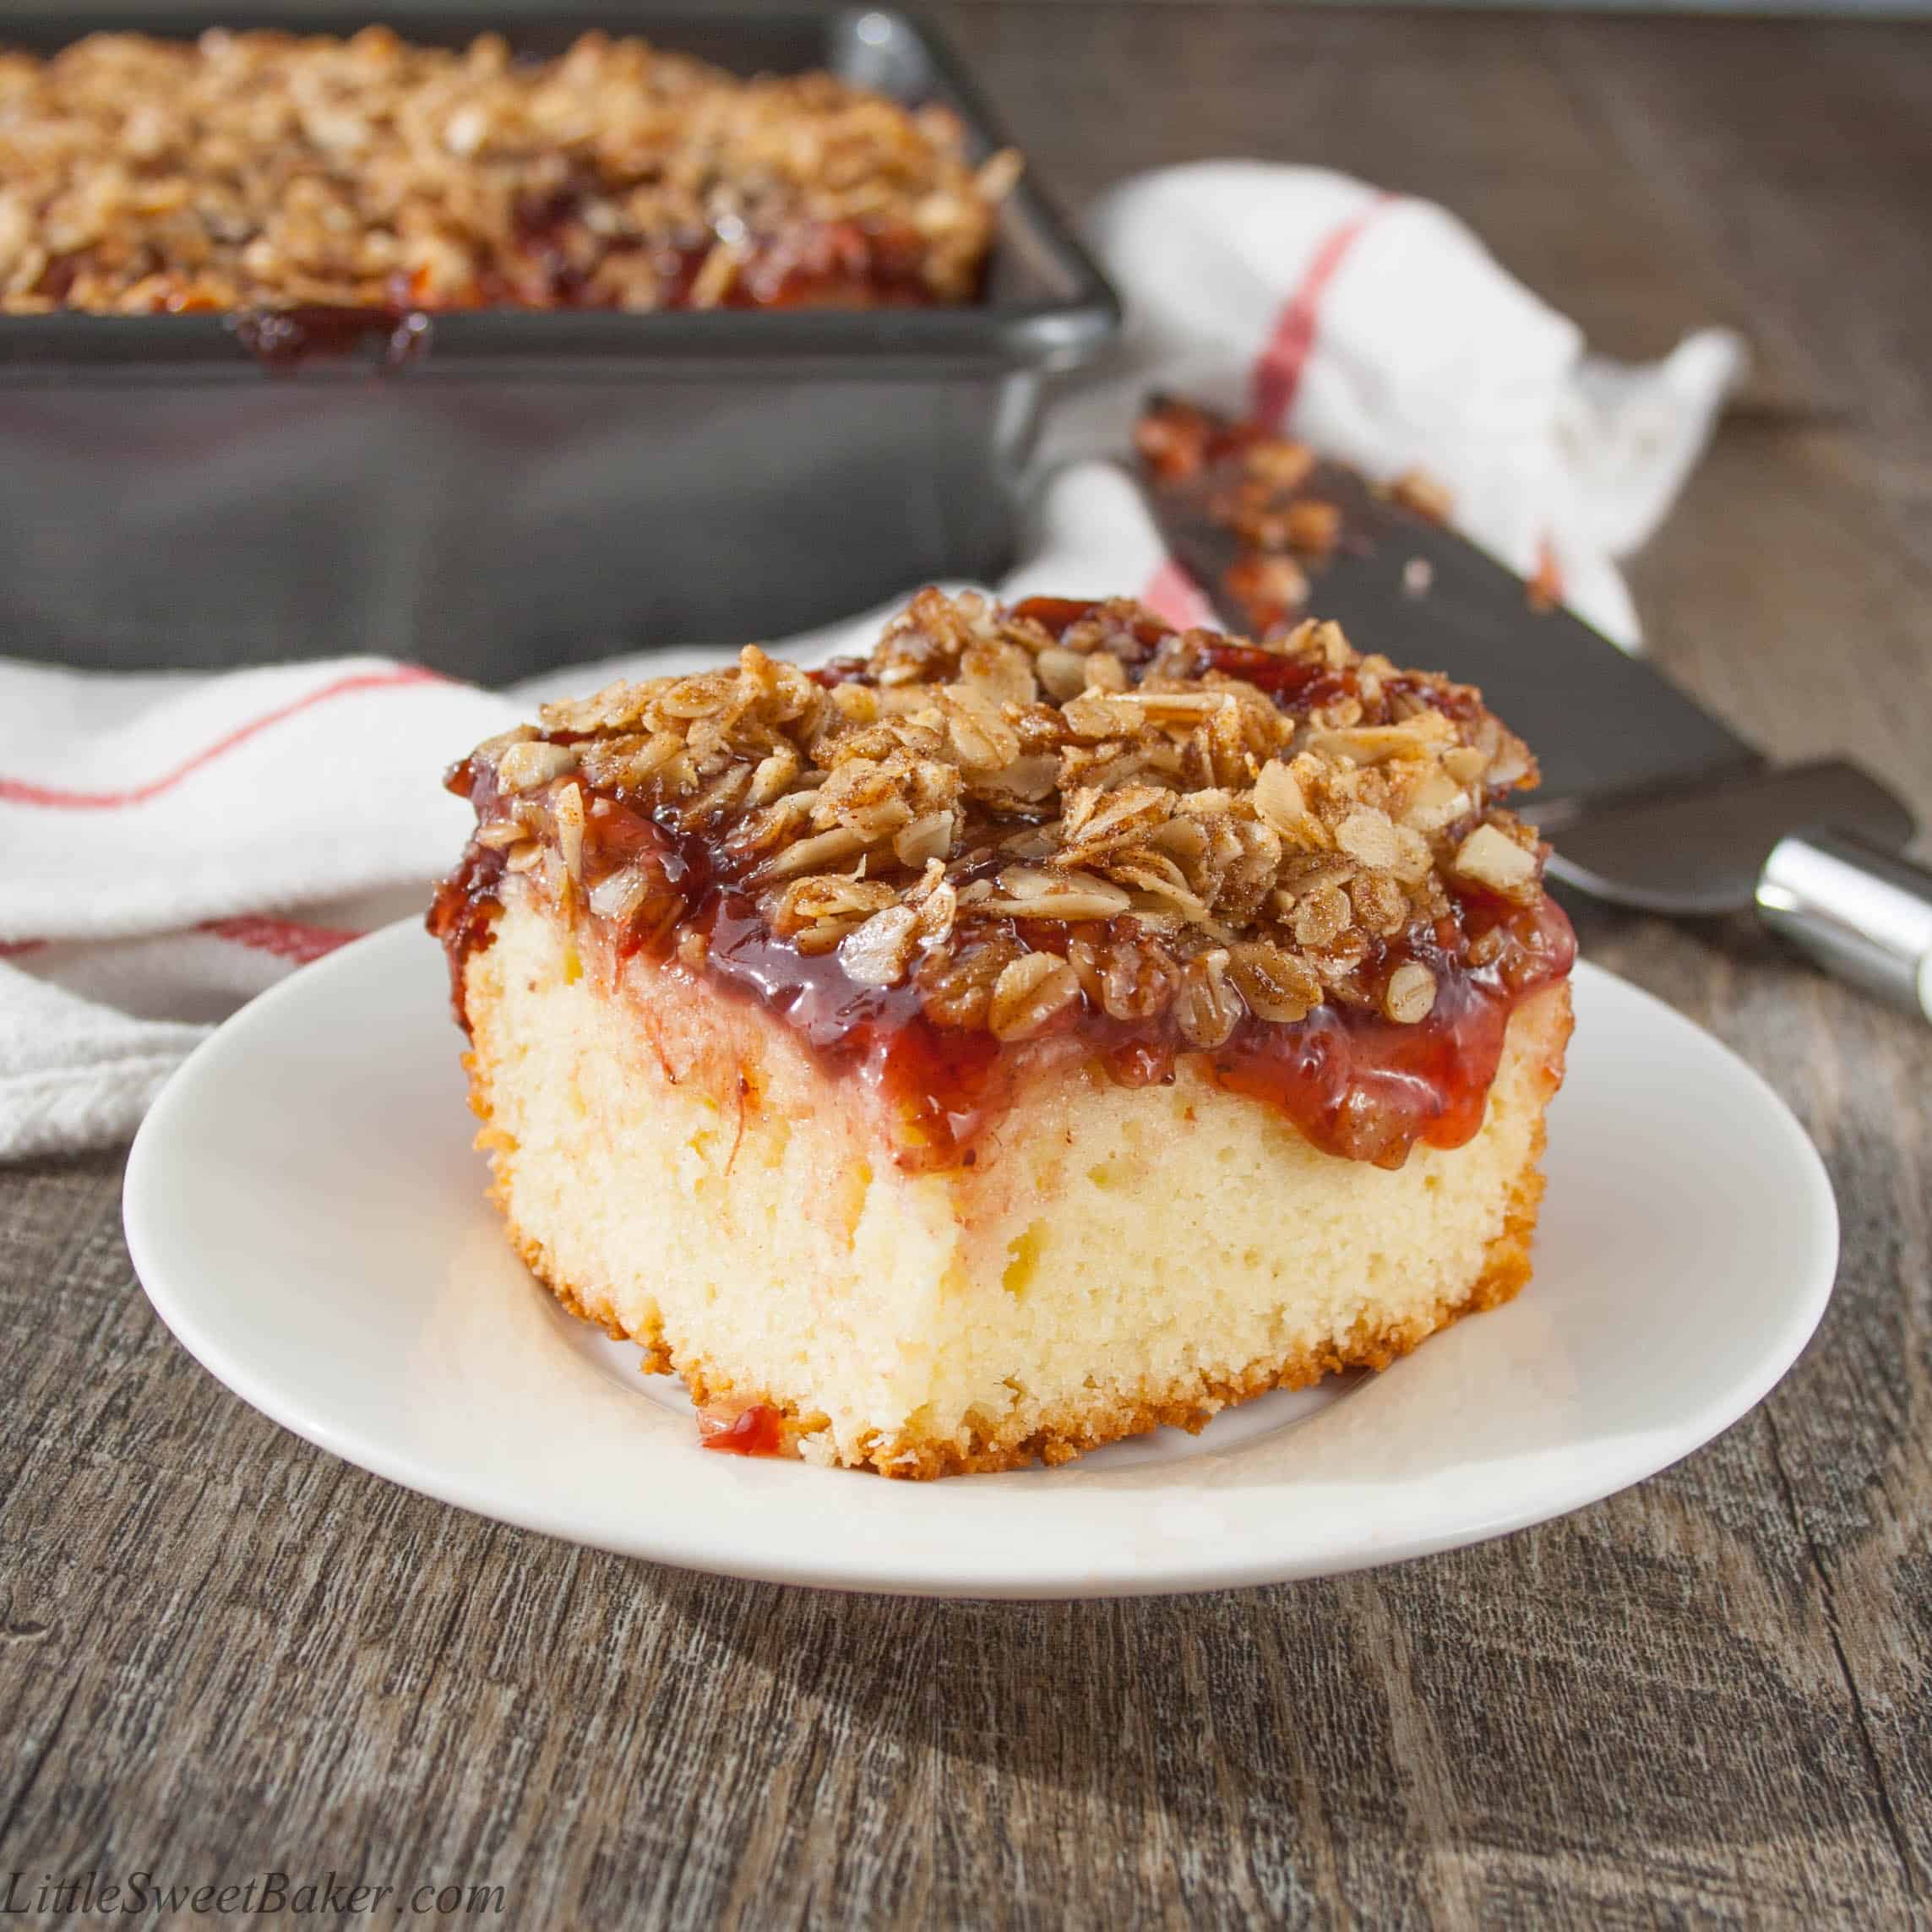 FRUIT TOPPED STREUSEL COFFEE CAKE. A delicious buttery coffee cake topped with sweet fruit pie filling and a crunchy cinnamon brown sugar almond & oat streusel.